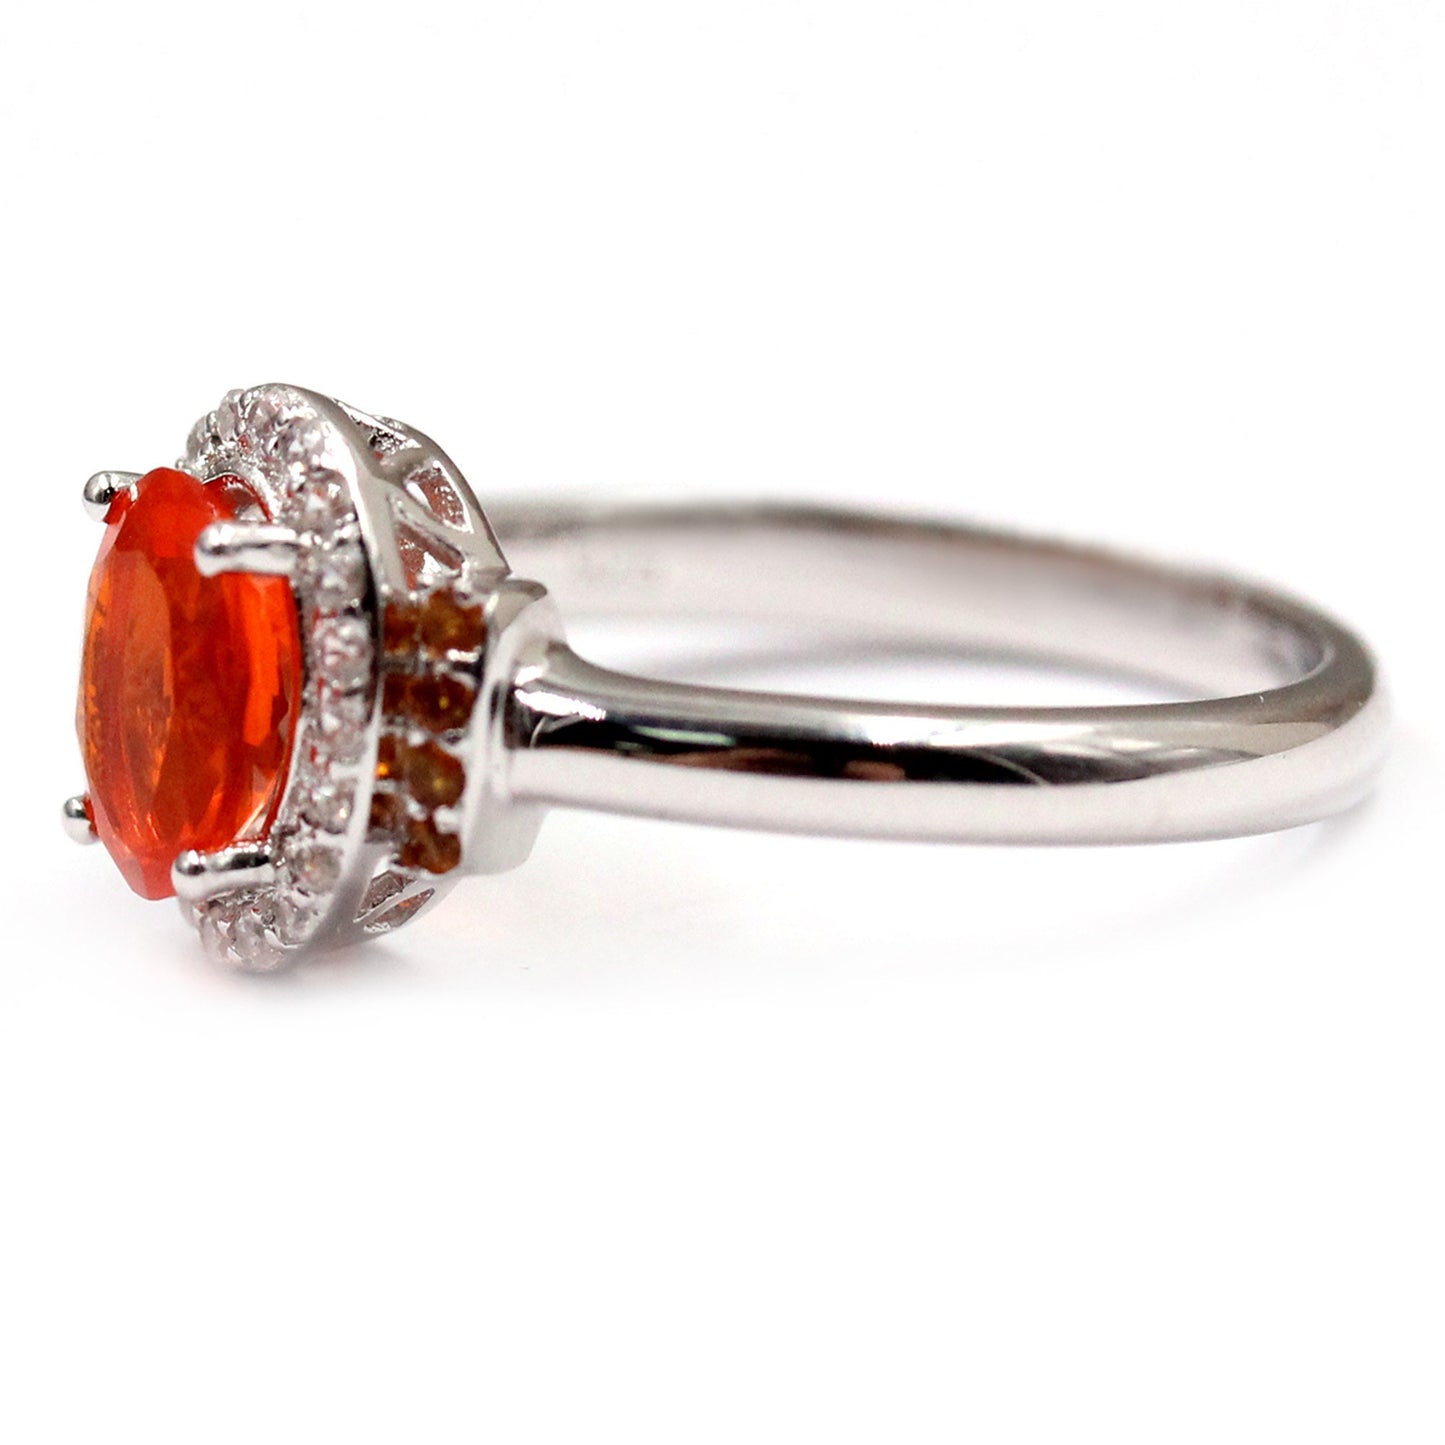 Orange Opal With Madeira Citrine Gemstone Ring, 925 Sterling Silver Ring, Engagement Ring, Birthstone Jewelry Anniversary Gift-Gift For Her